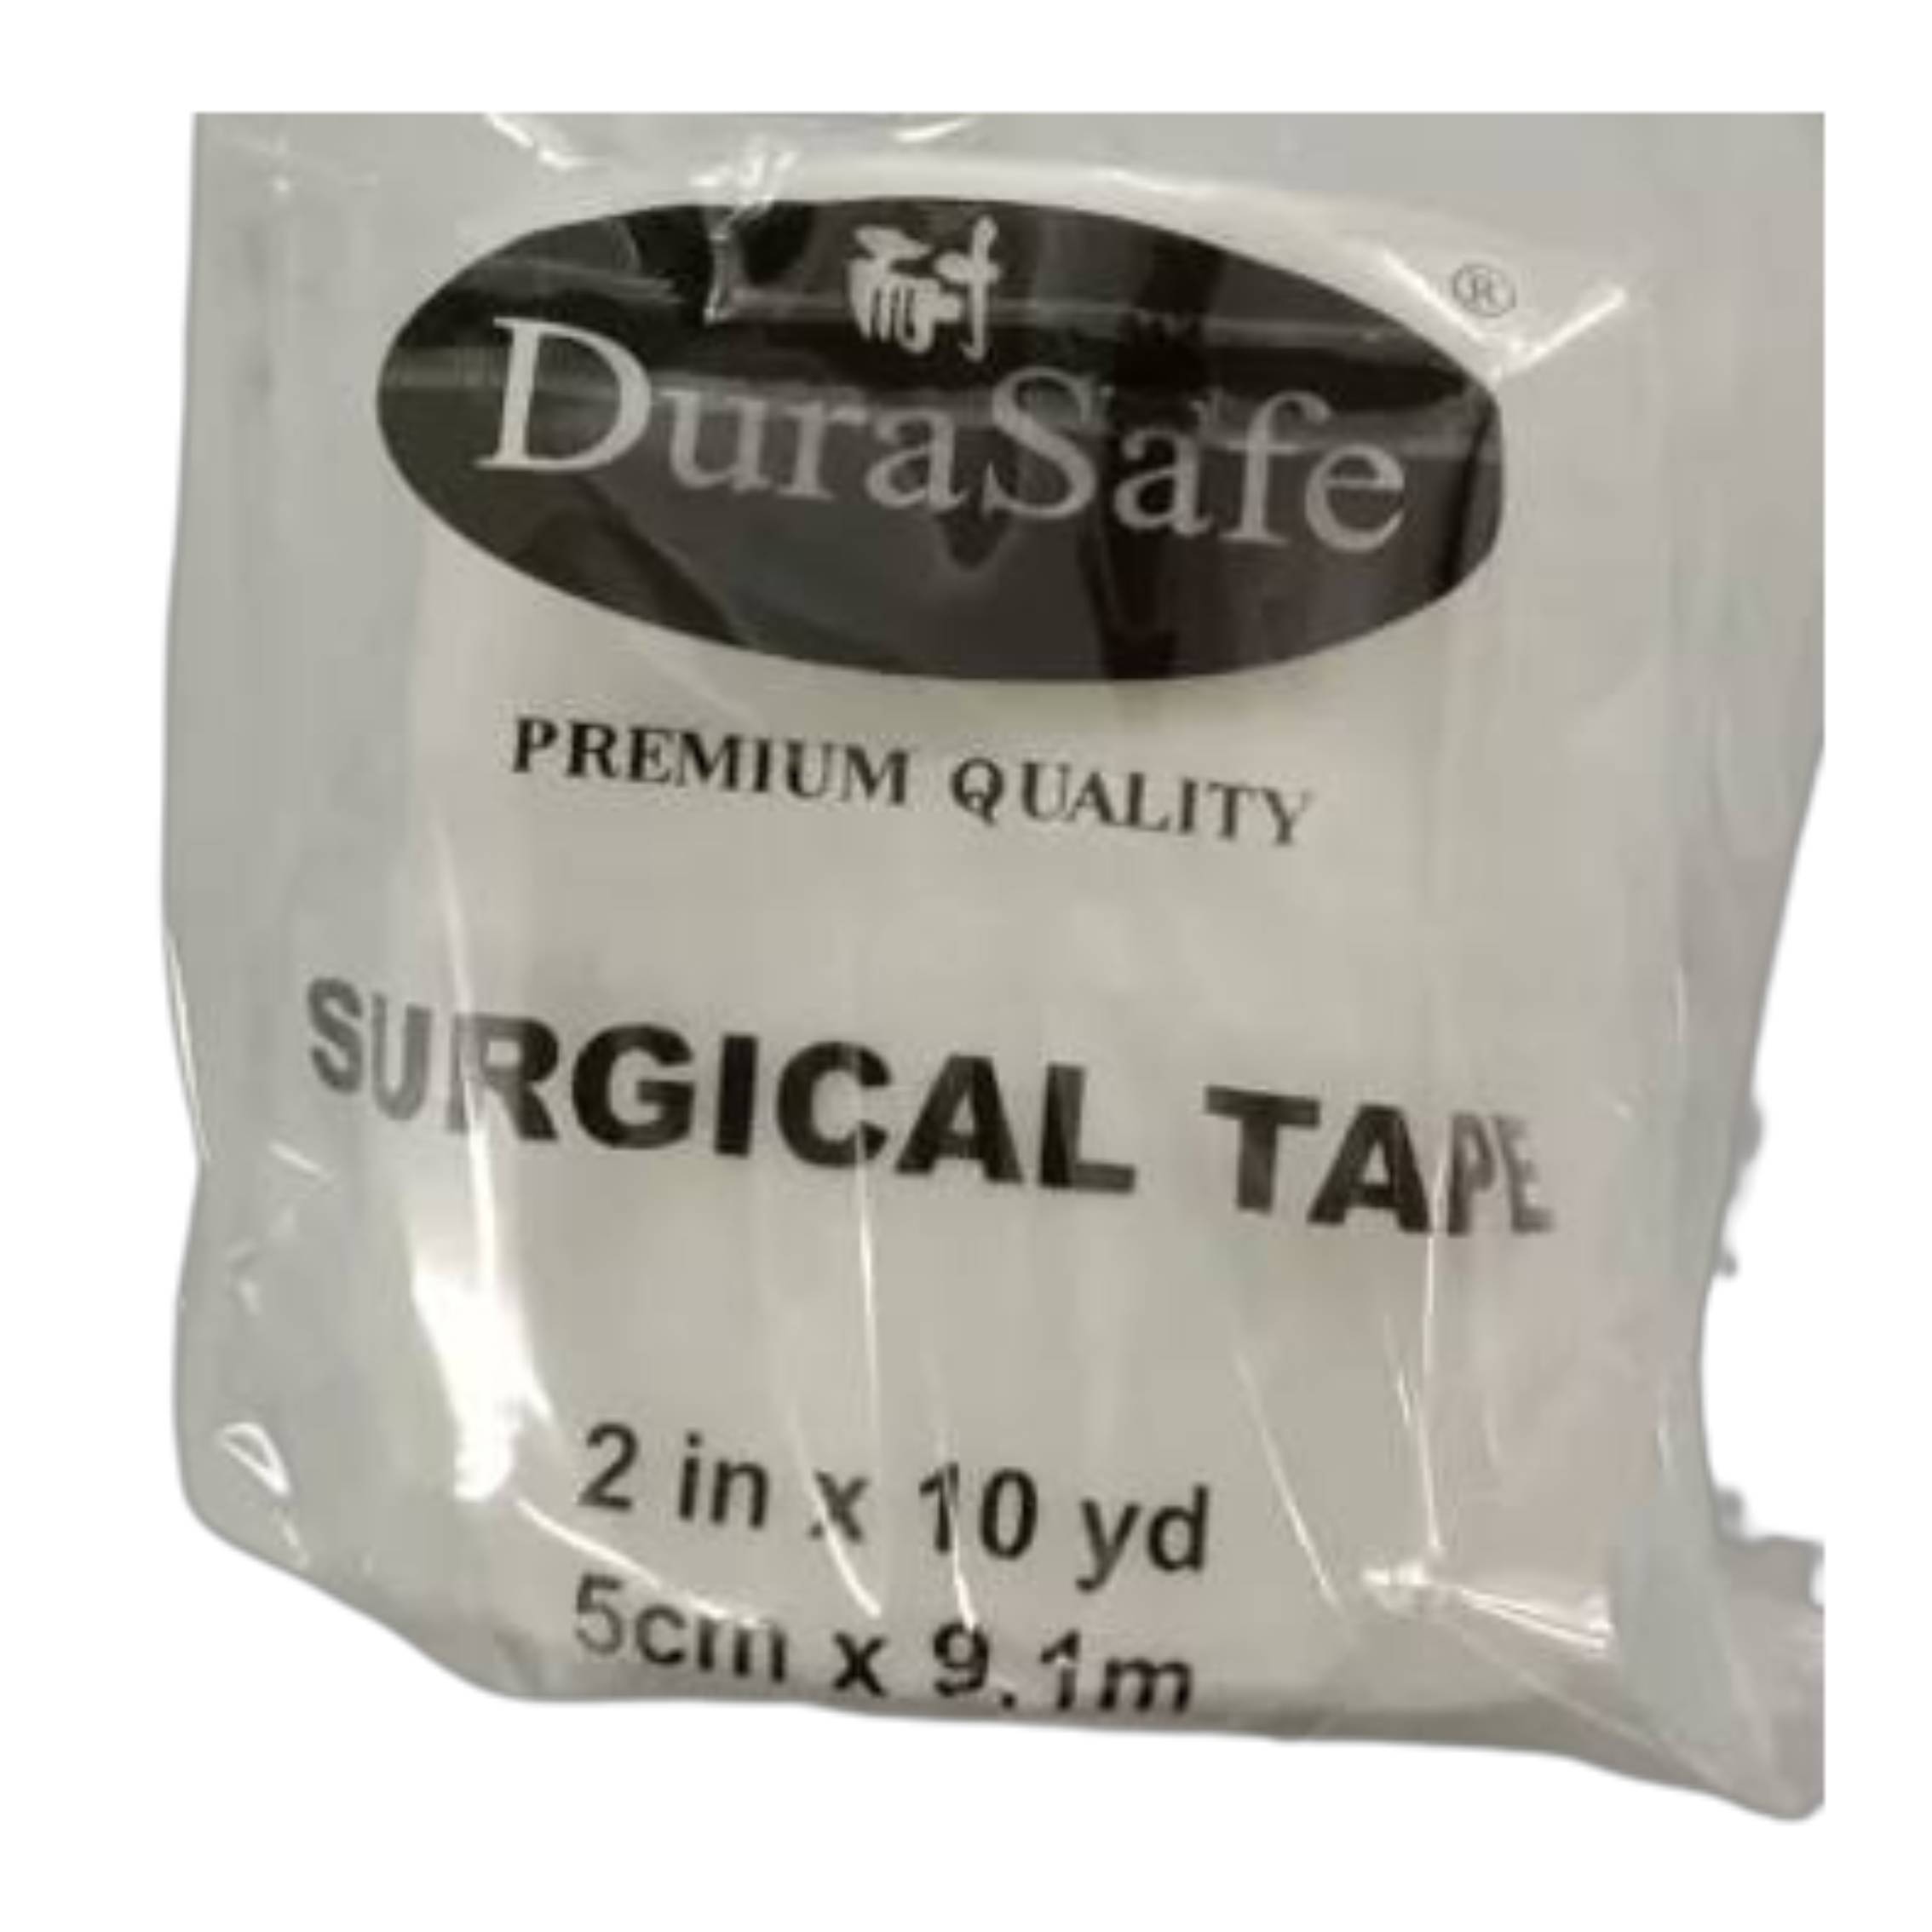 DuraSafe Surgical Tape Without Dispenser 1s 1/2 inch - DoctorOnCall Online Pharmacy